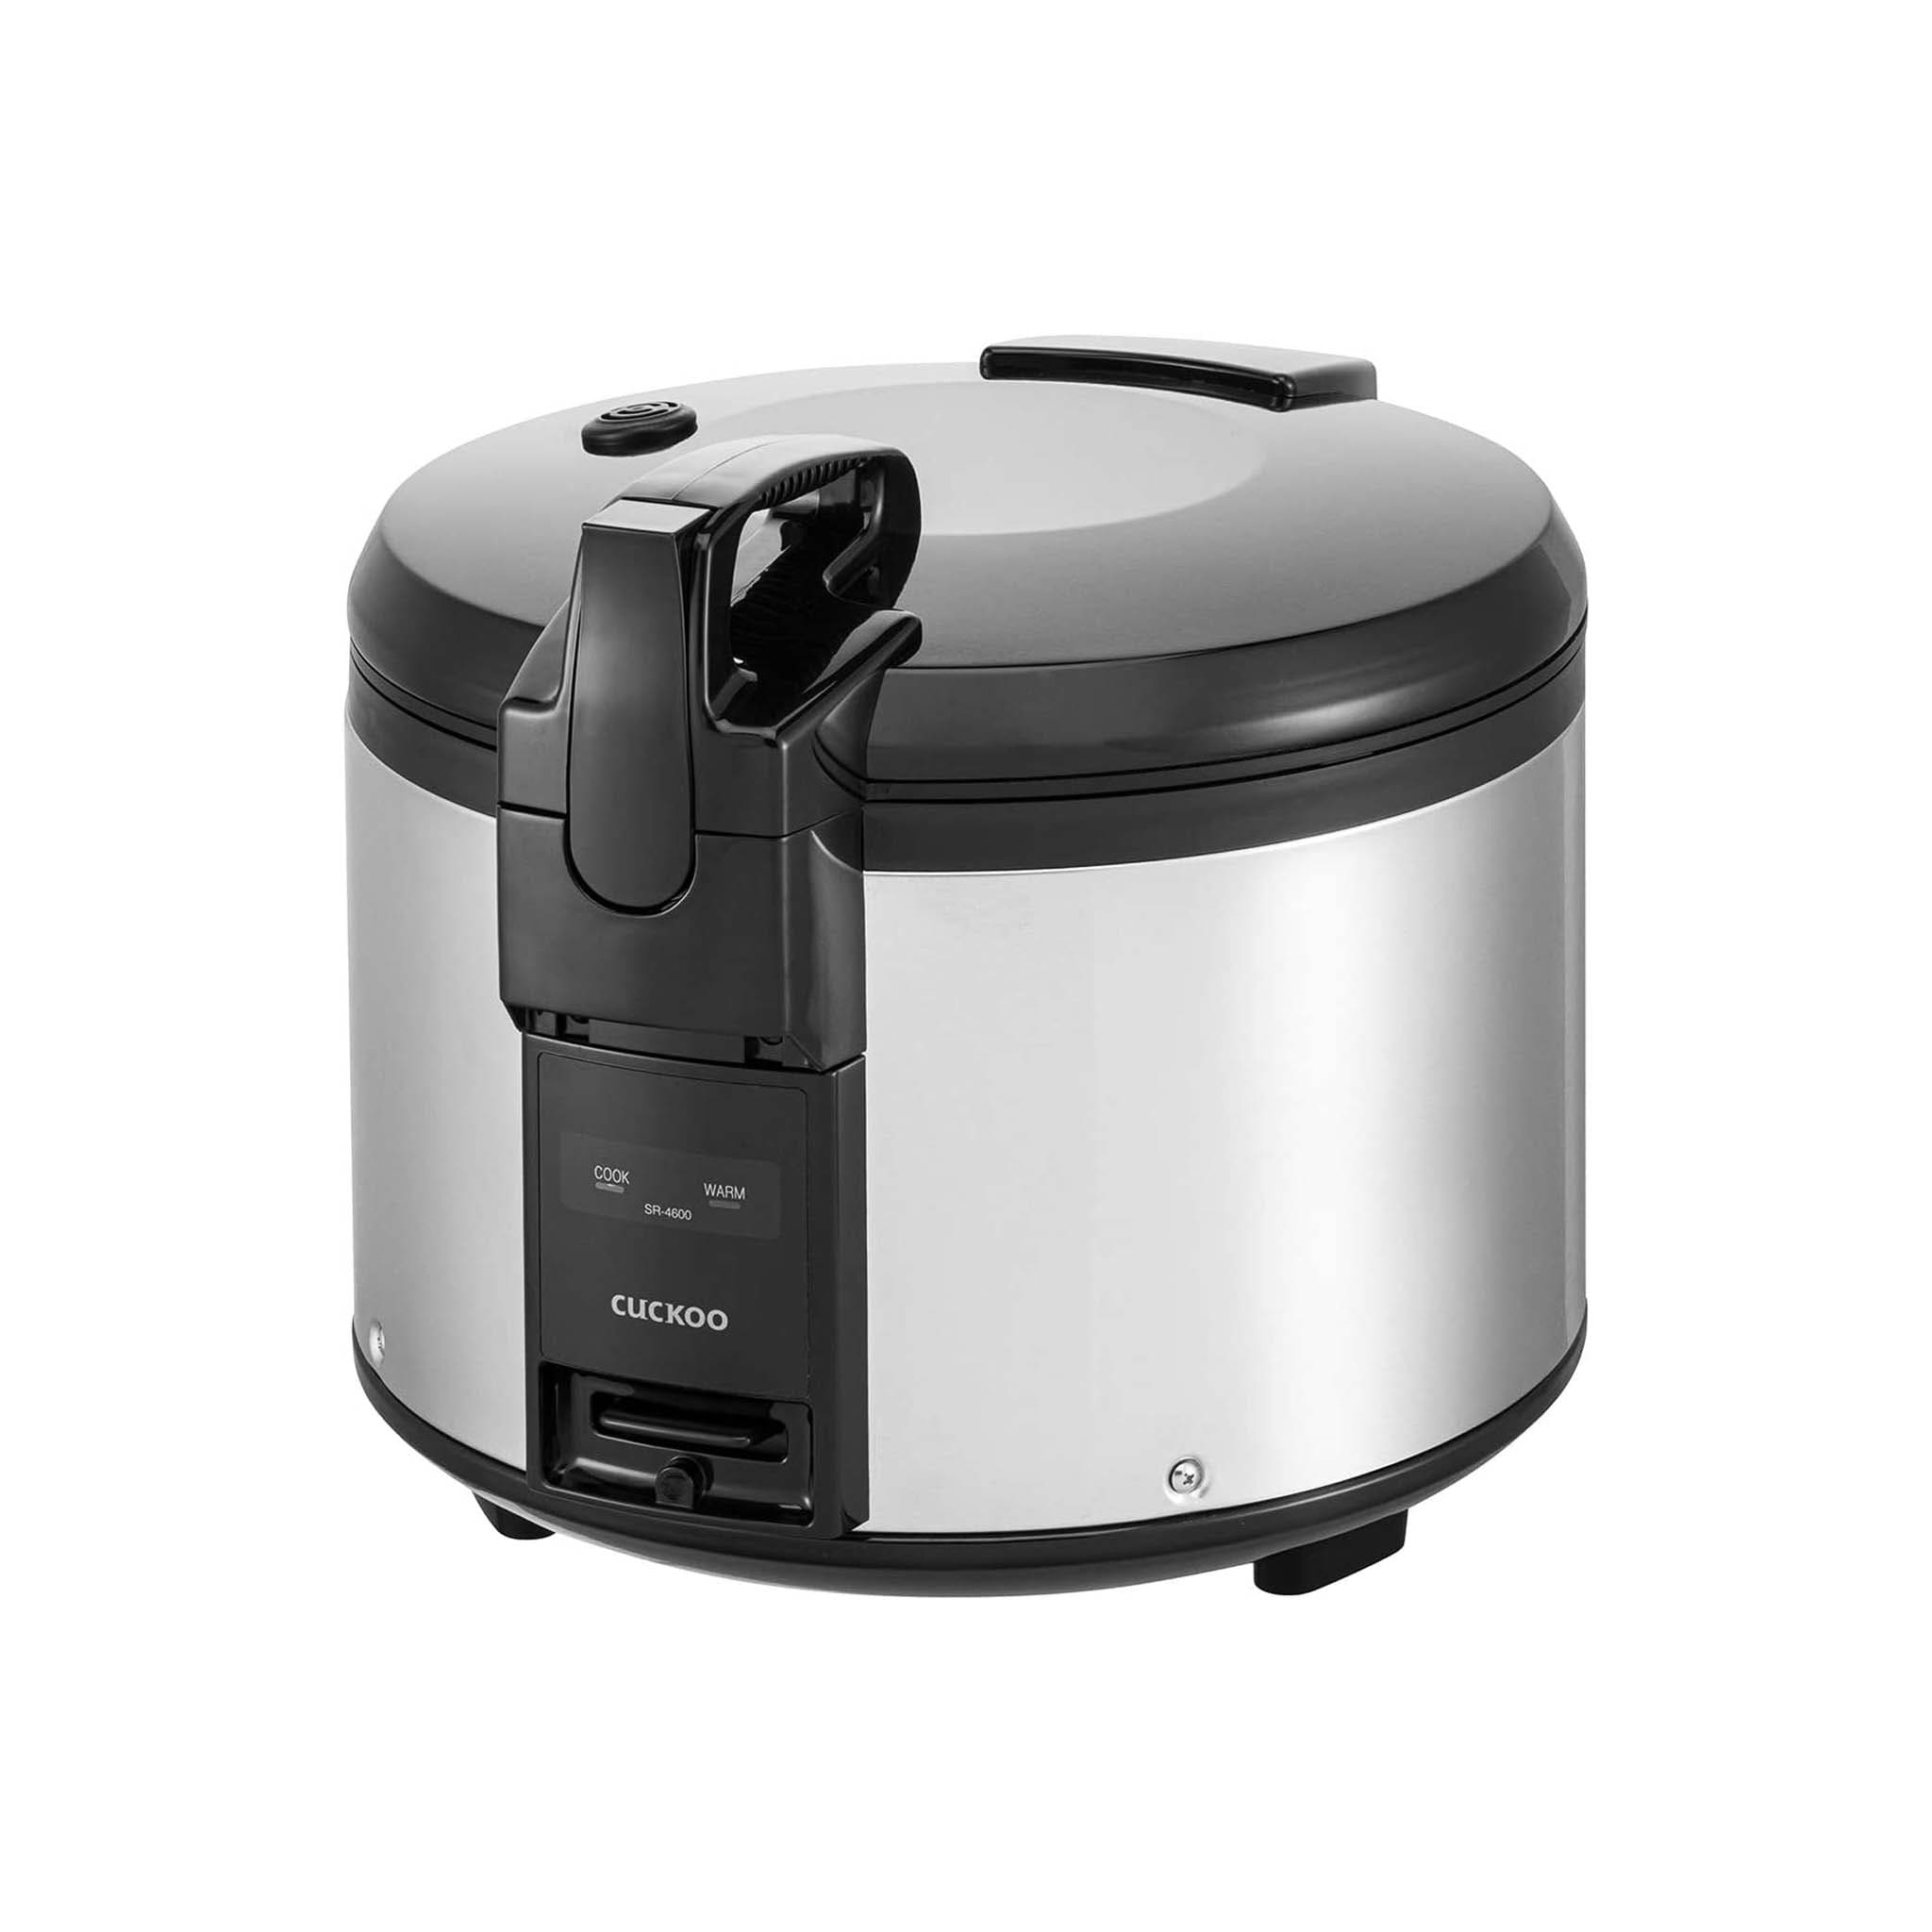 Cuckoo Electric Rice Cooker 4.6L - 25 Persons